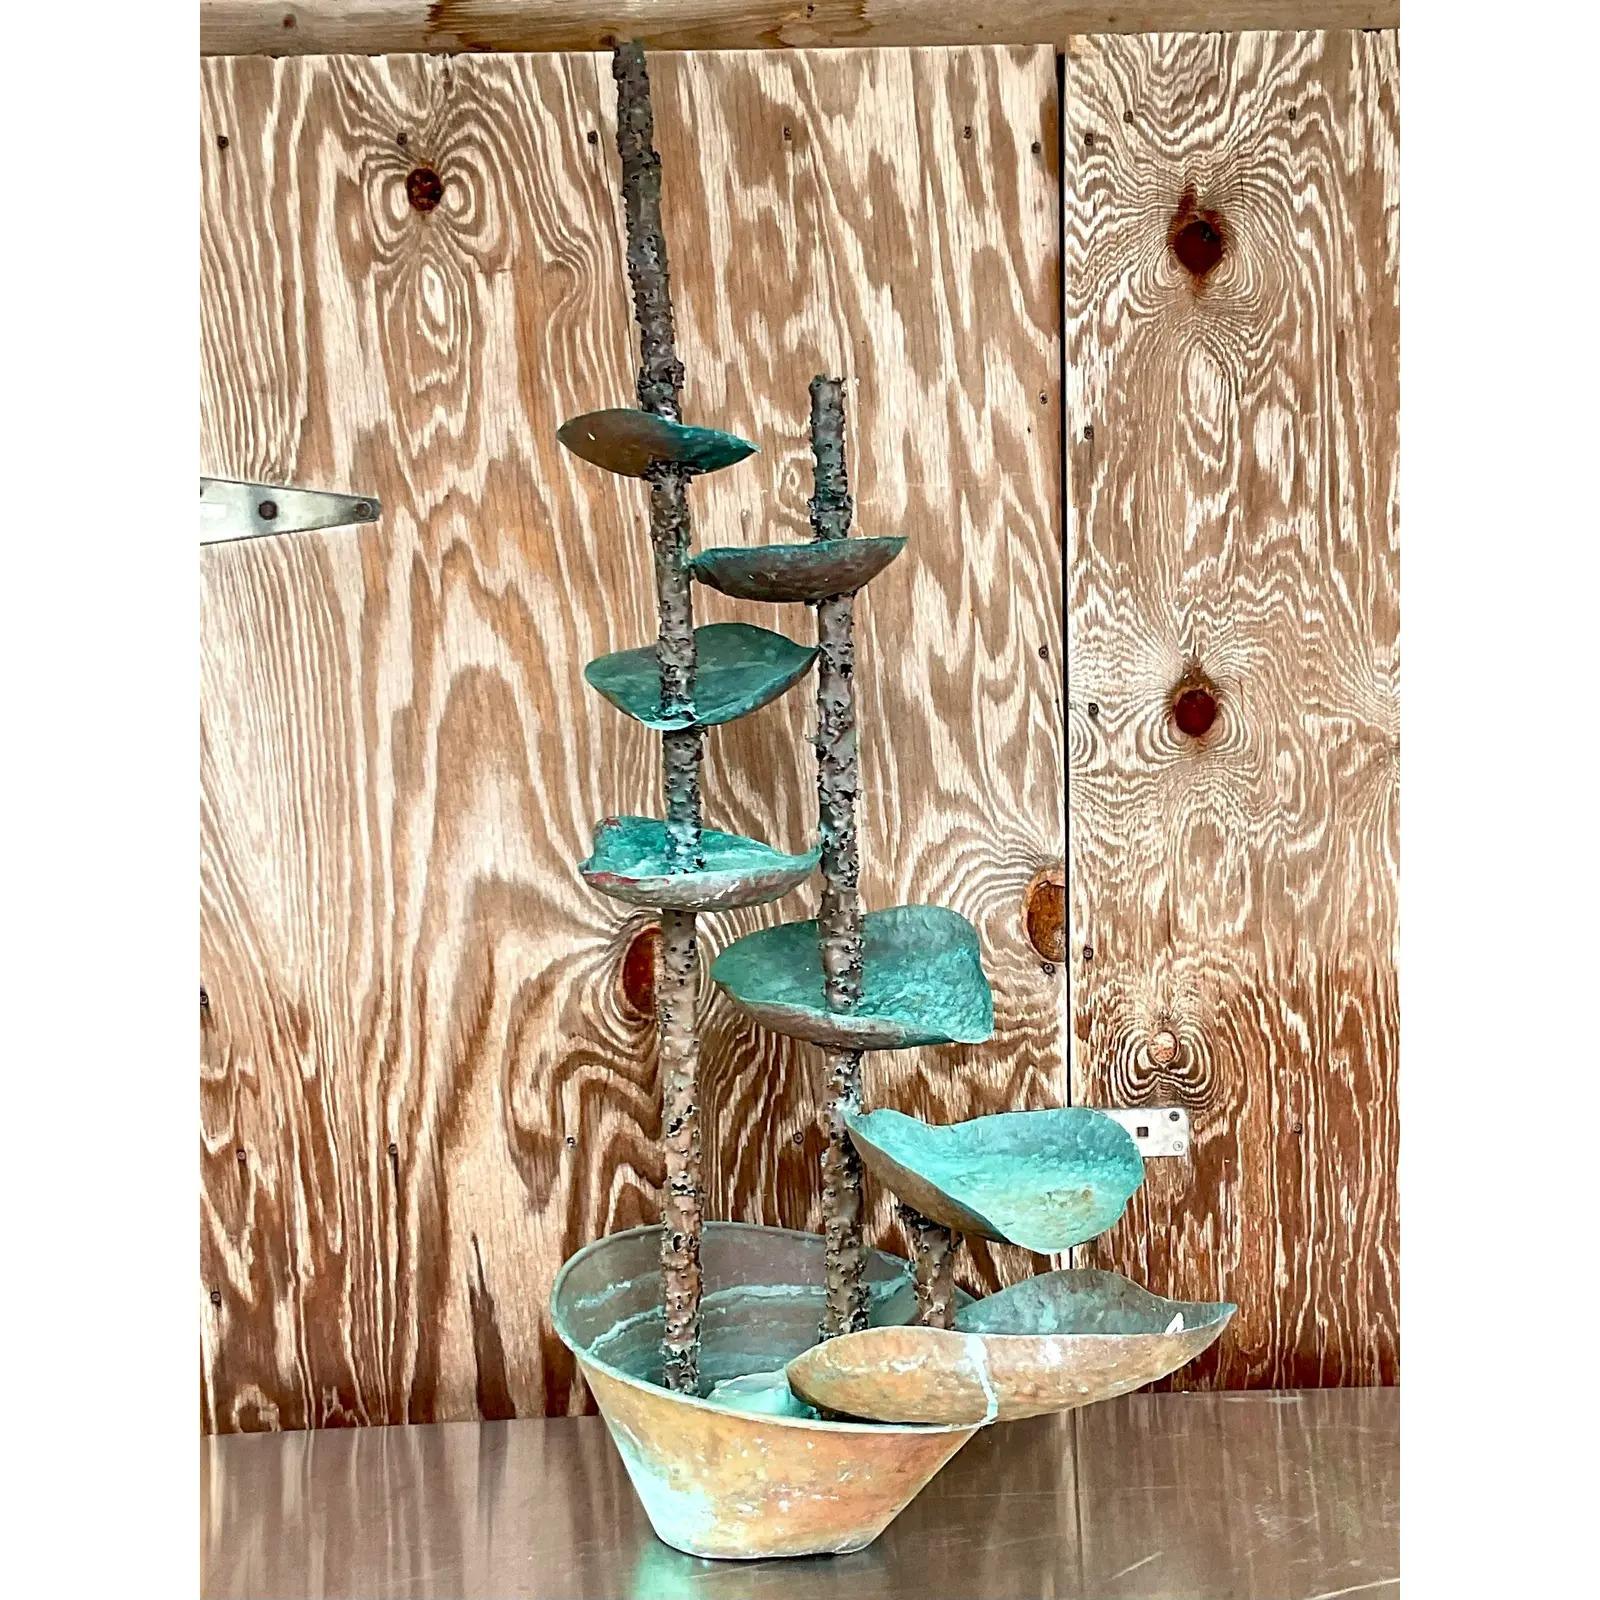 Fabulous vintage Boho water fountain. Beautiful hammered copper with an amazing patinated finish from time. Includes motor and pump, but I have not tested it. Acquired from a Palm Beach estate.